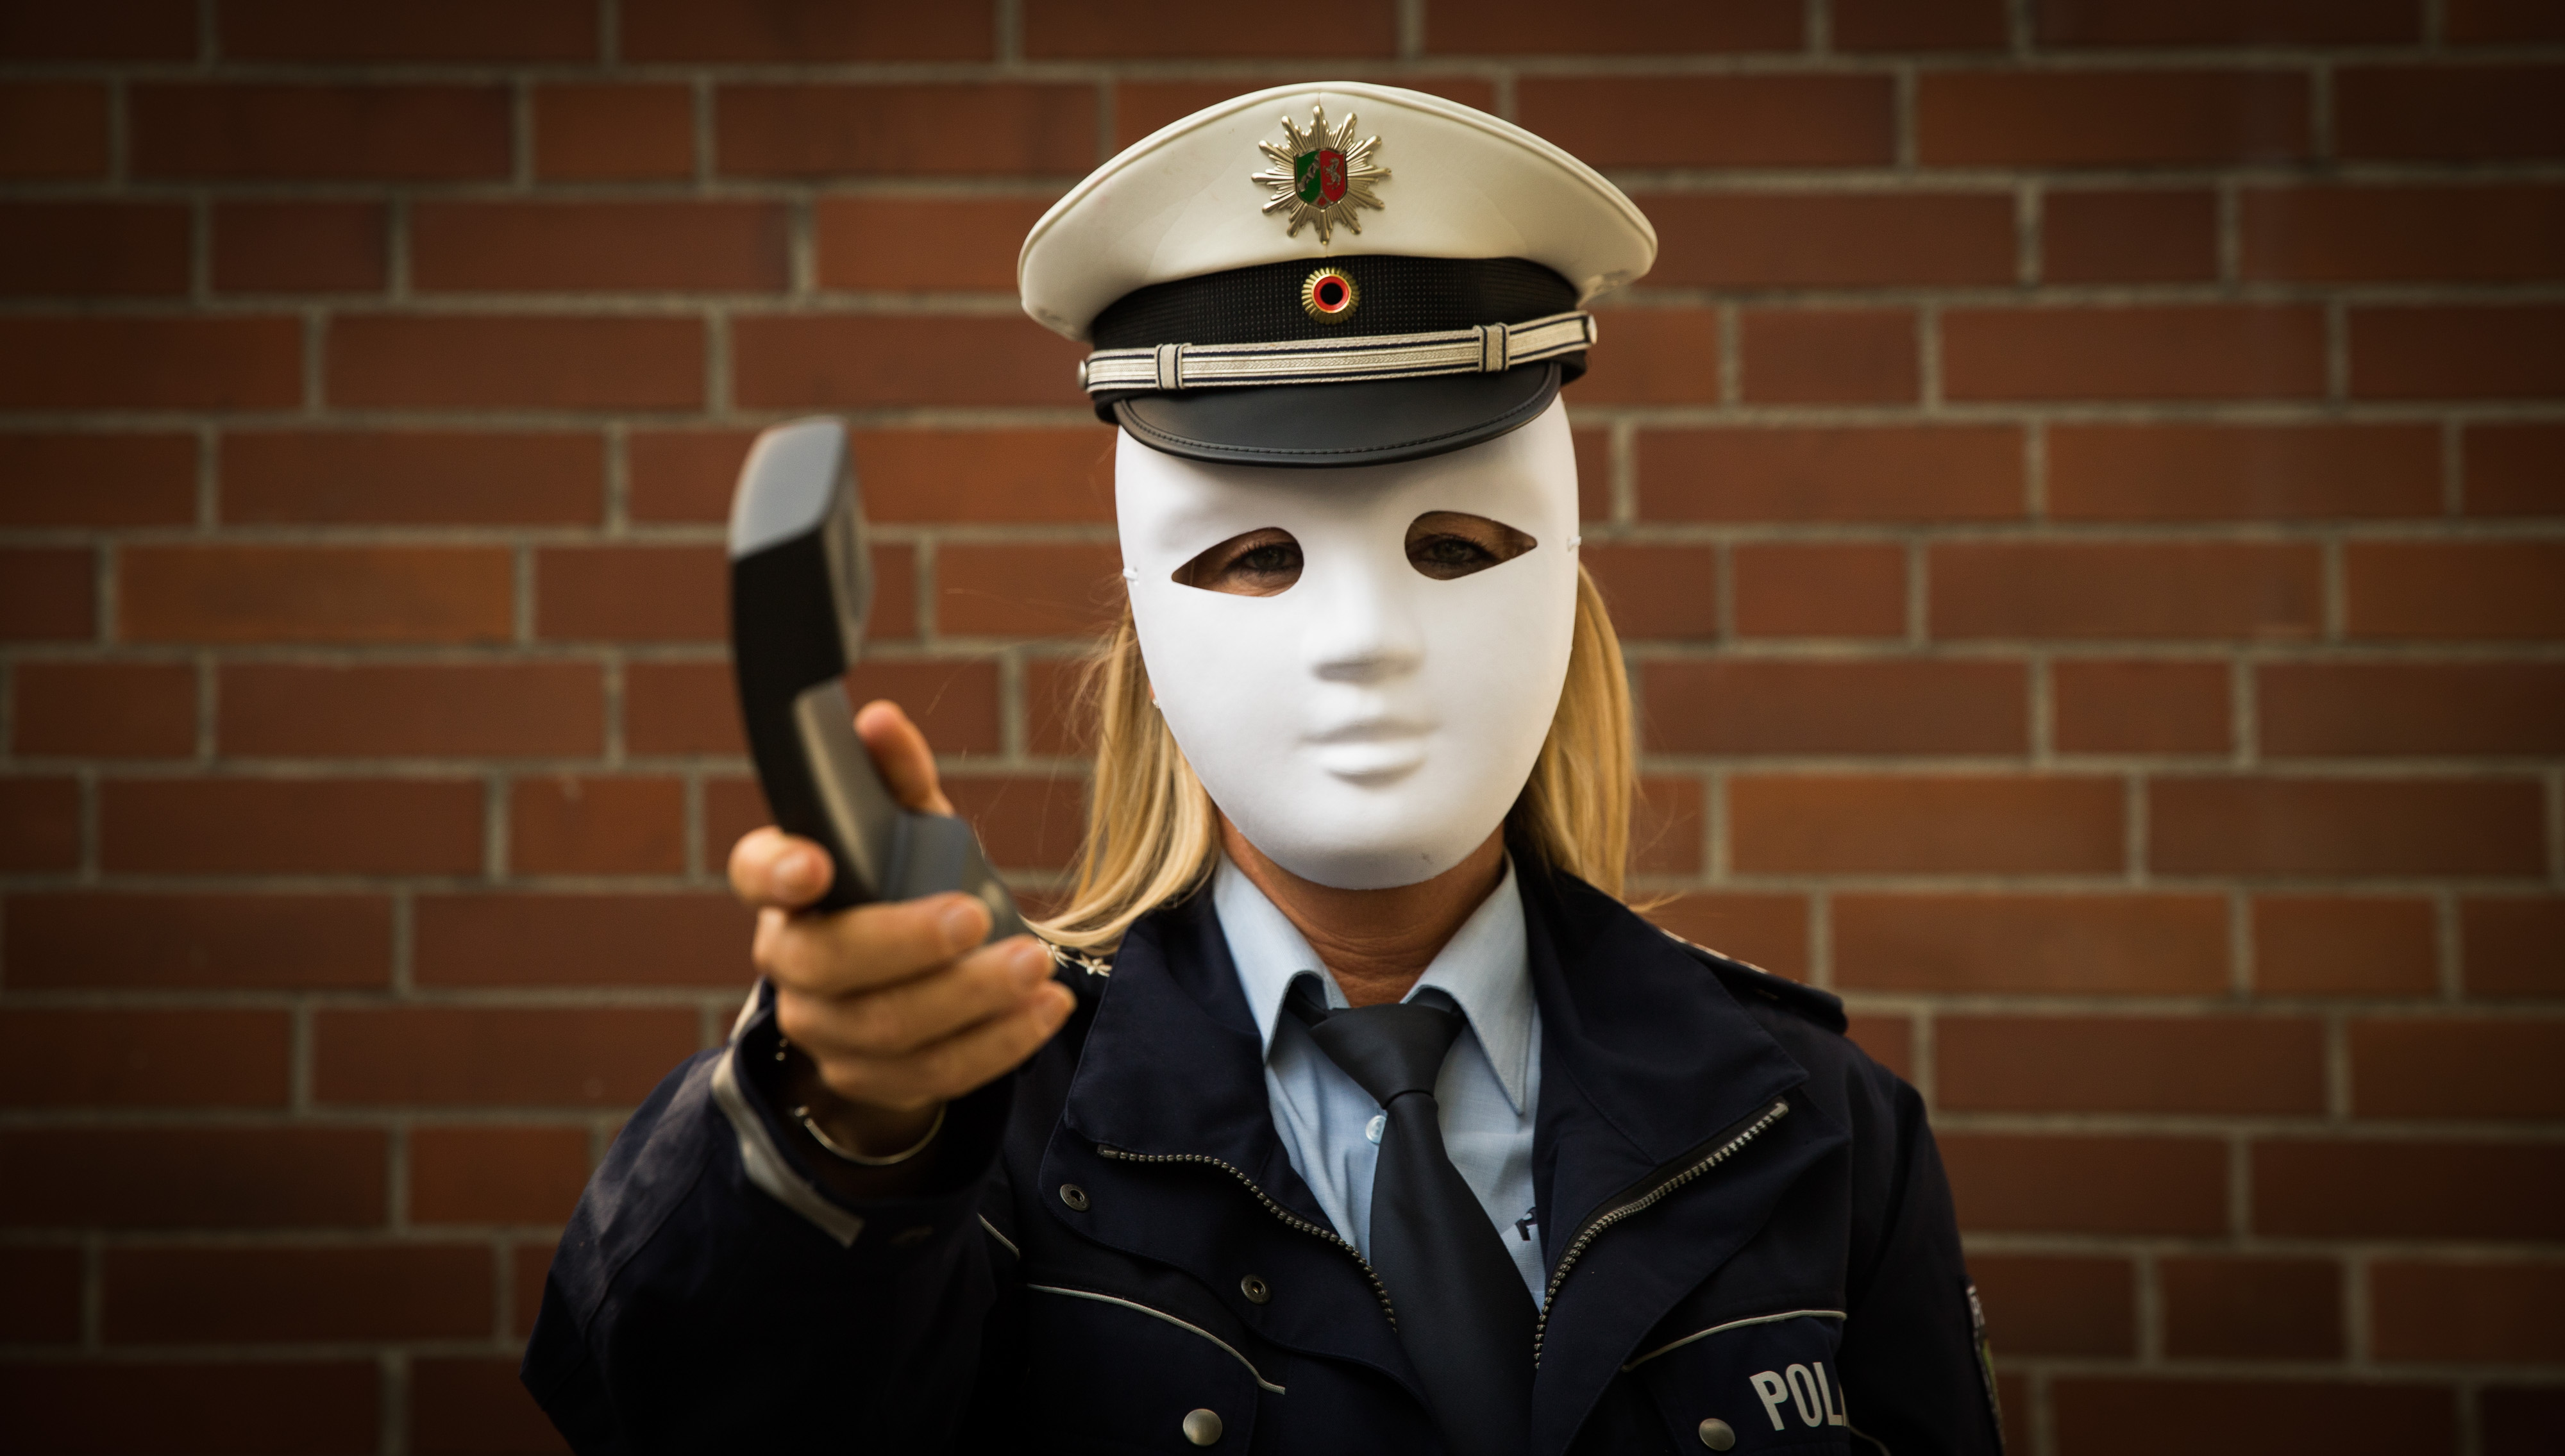 Here is just a symbolic image - the fact is: fake police officers deceive citizens on the phone